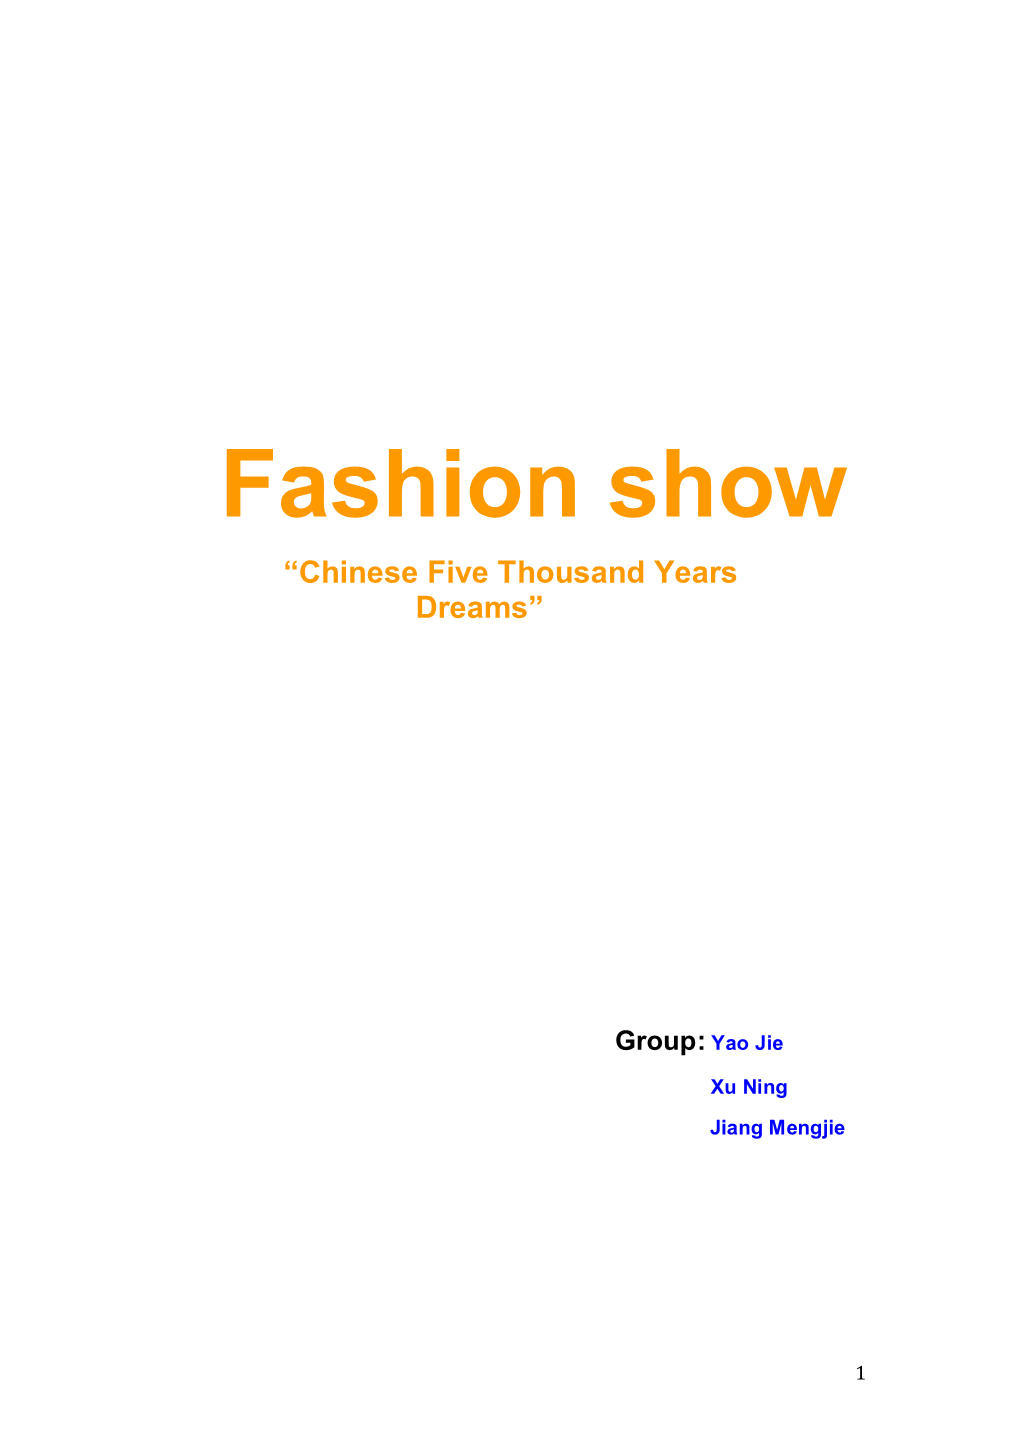 Fashion Show “Chinese Five Thousand Years Dreams”